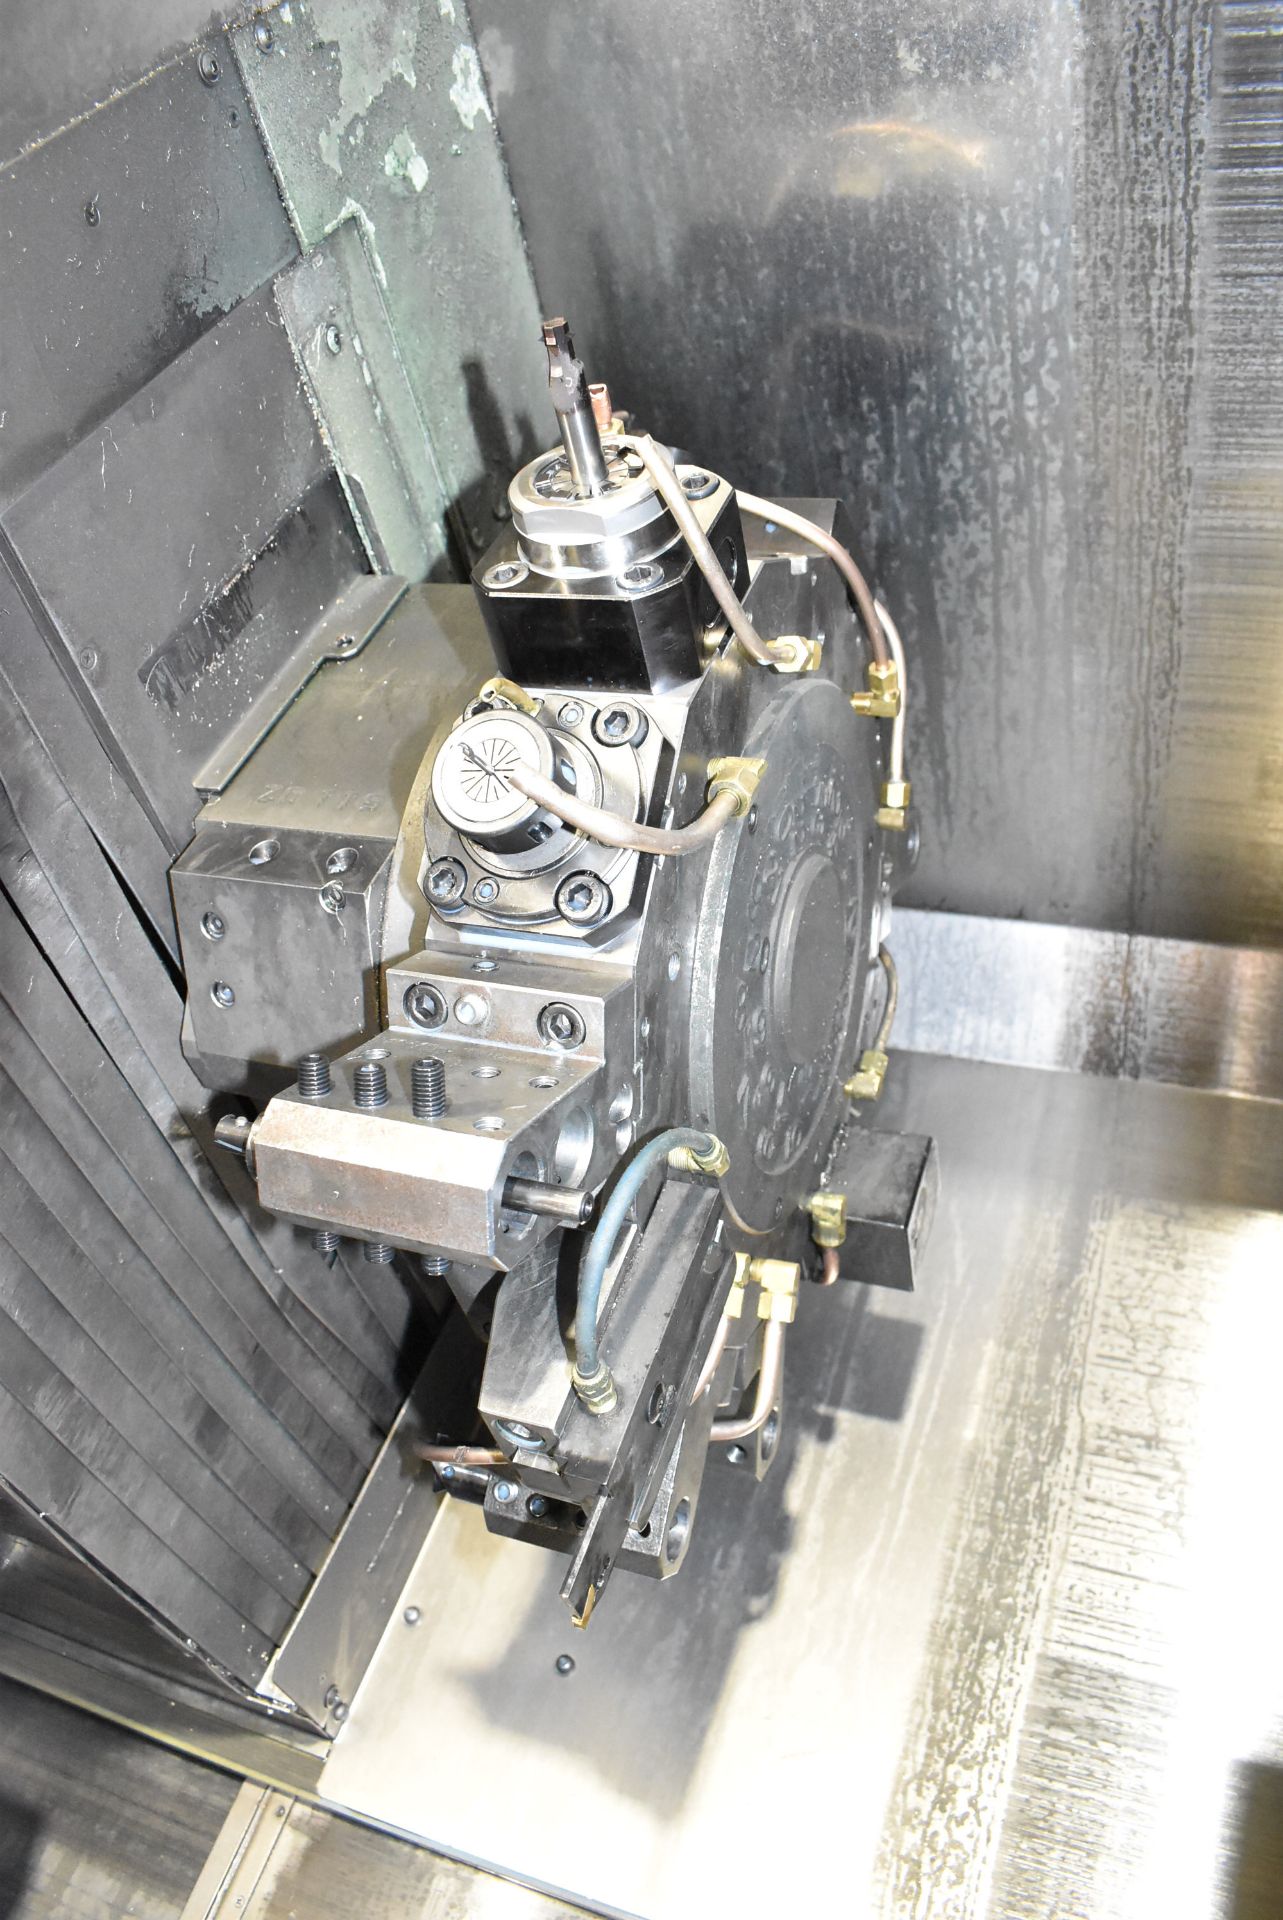 NAKAMURA-TOME (2006) WT-250 MMYS MULTI-AXIS OPPOSED SPINDLE AND TWIN TURRET CNC MULTI-TASKING CENTER - Image 3 of 9